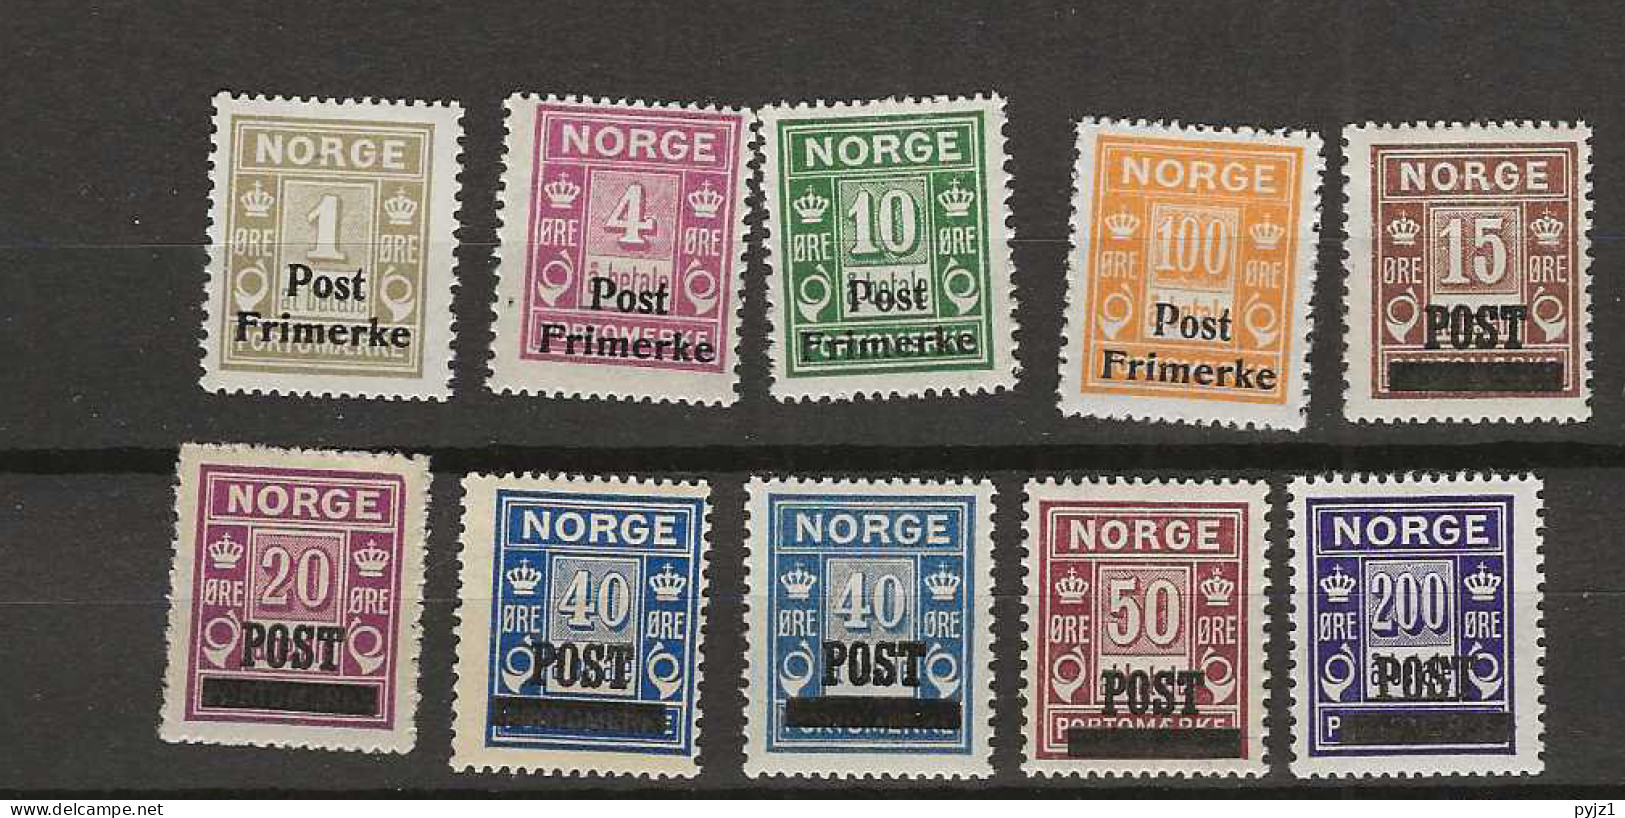 1929 MNH Norway Mi 141-149 (20 Ore Is MH/*) Including Both Shades Of 40 Ore - Neufs